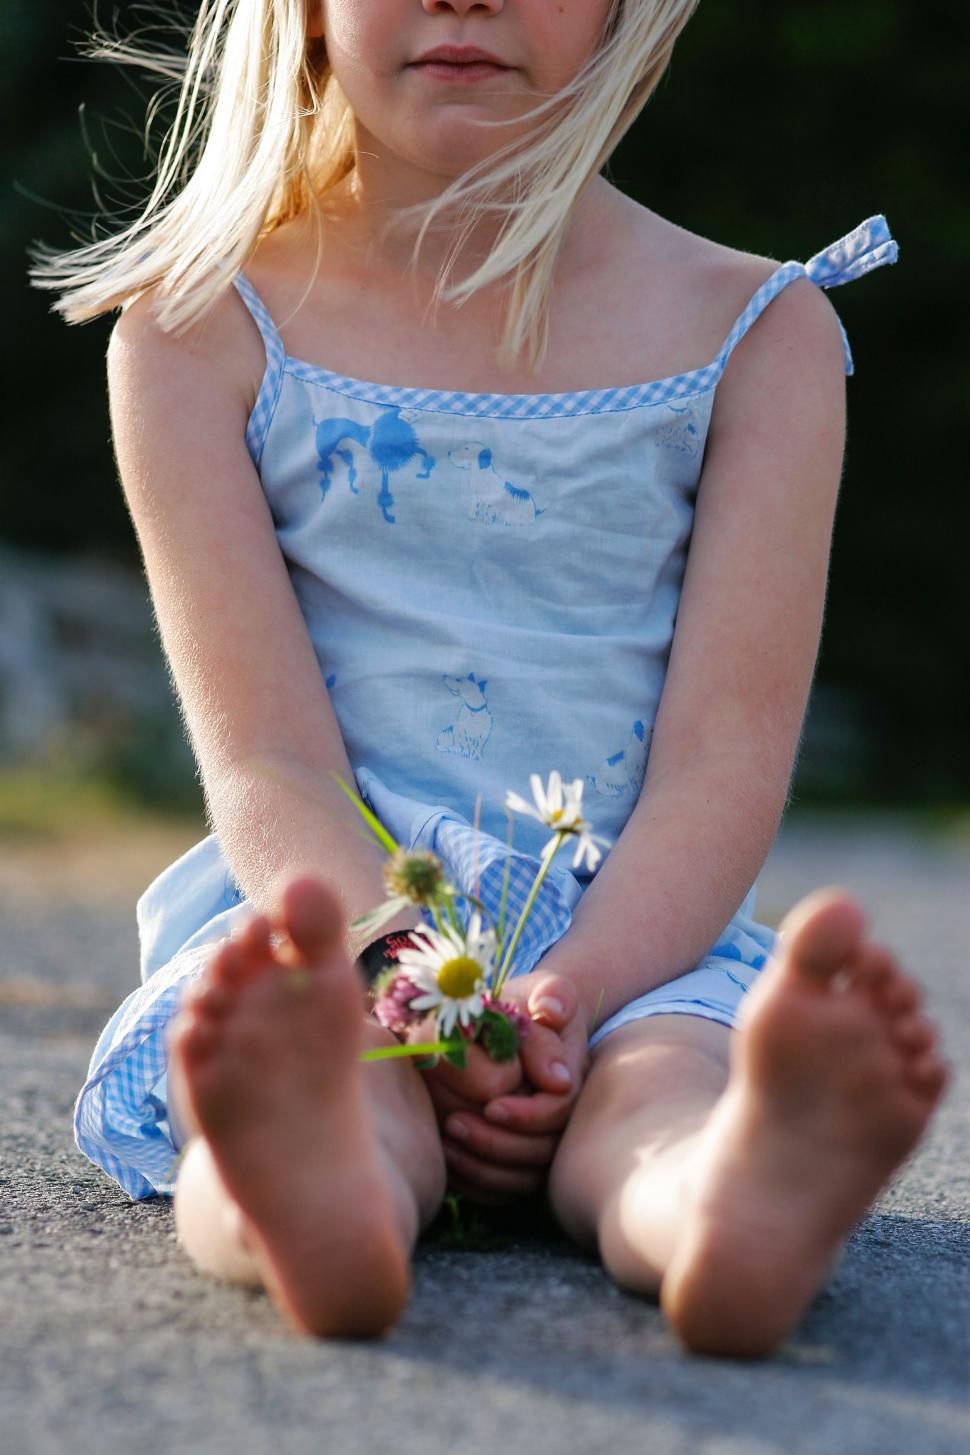 Free Image of Young Girl Sitting on Ground Holding Flower 